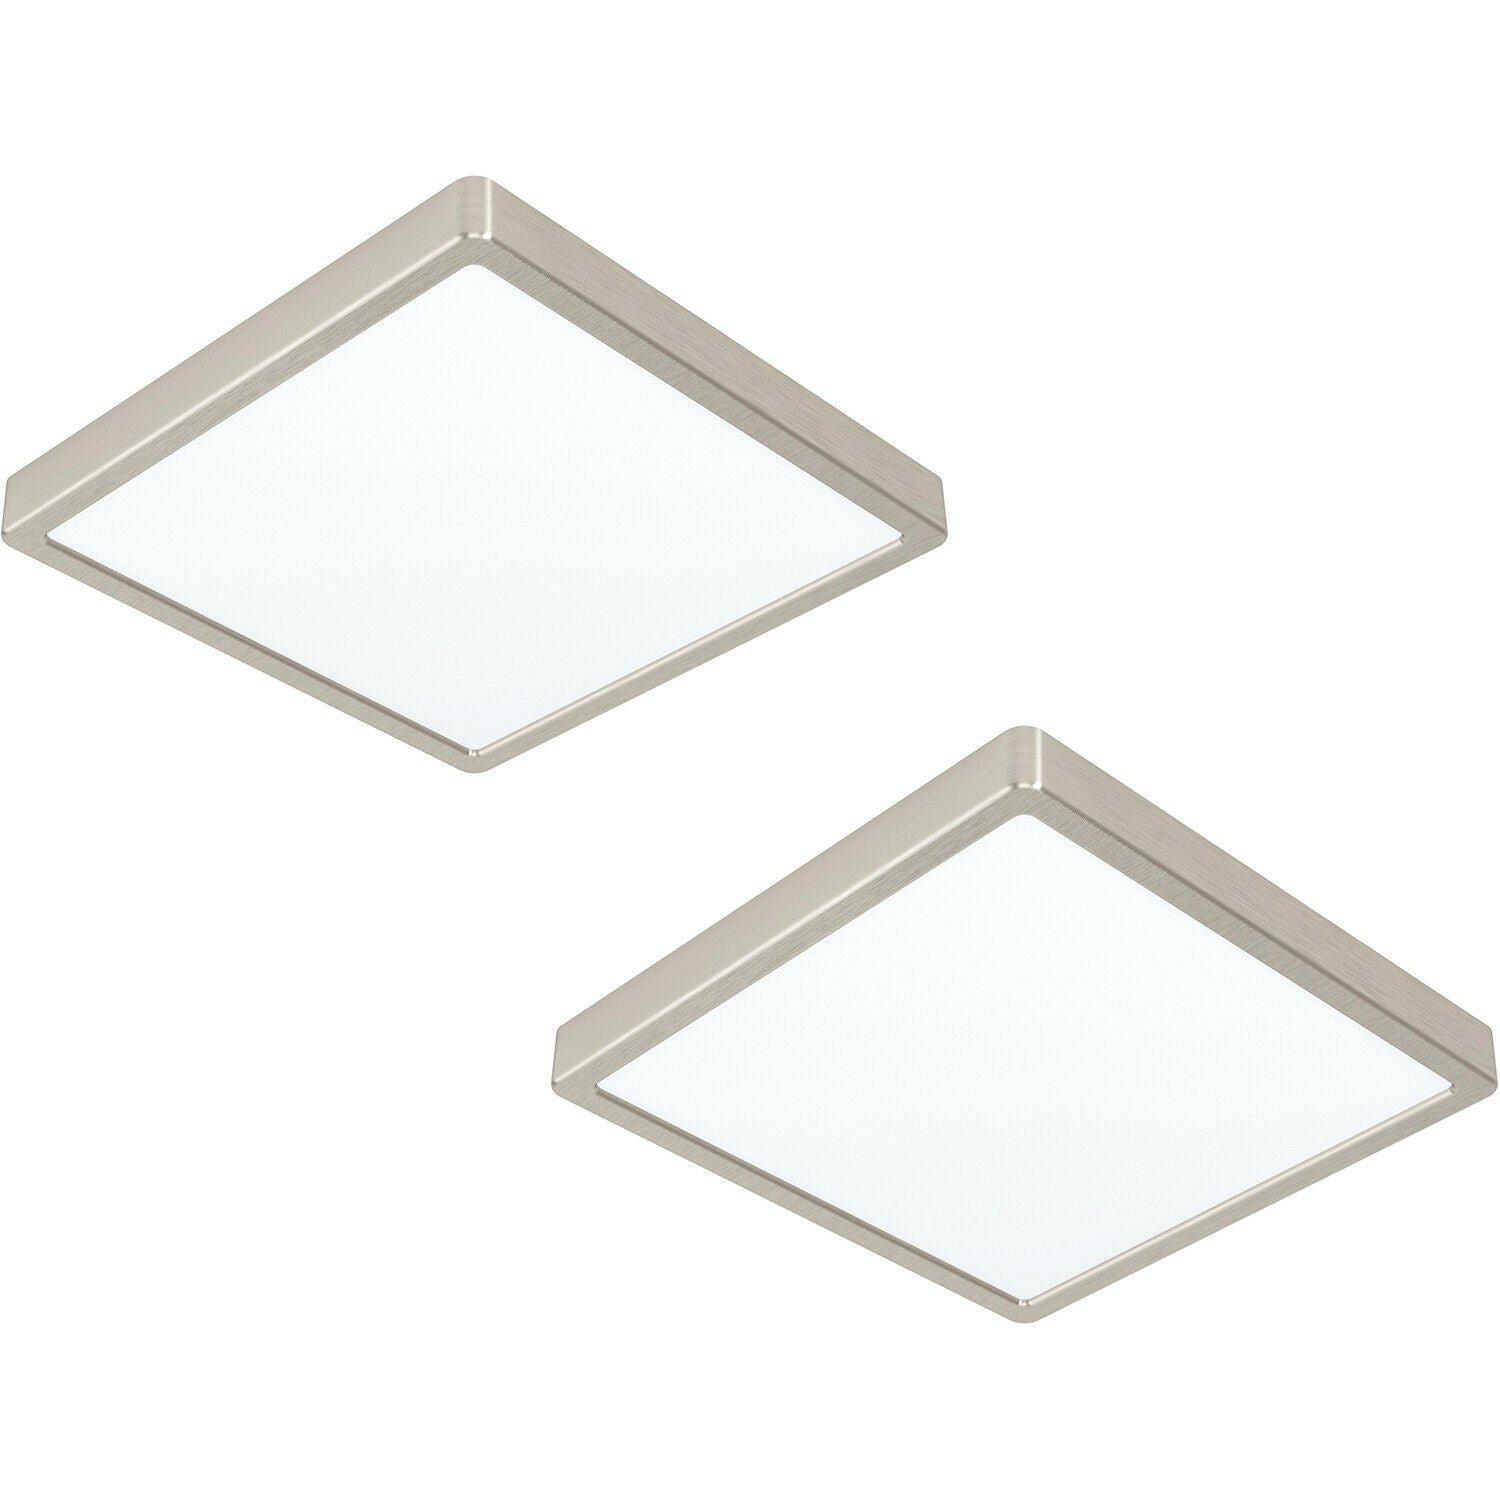 2 PACK Ceiling Light Satin Nickel 285mm Square Surface Mounted 20W LED 4000K